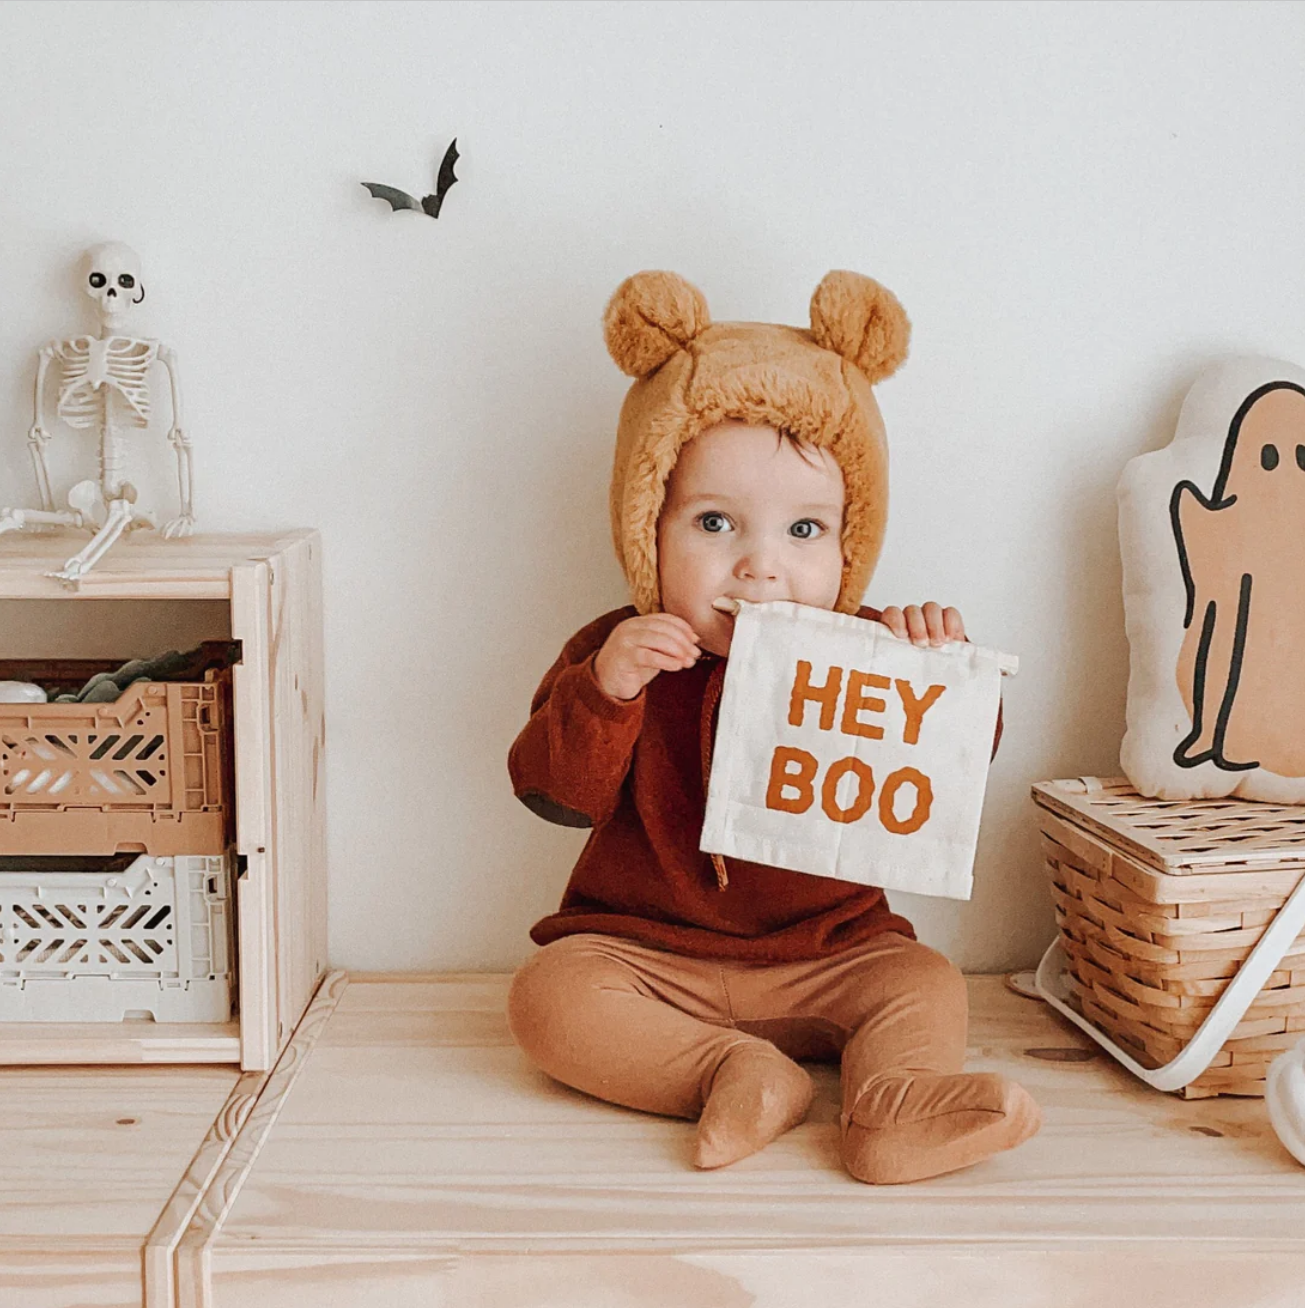 Imani Collective Décor "Hey Boo" Hang Sign by Imani Collective "Boo" Organic Canvas Hang Sign | Halloween Accessories for Kids | The Playful Peacock